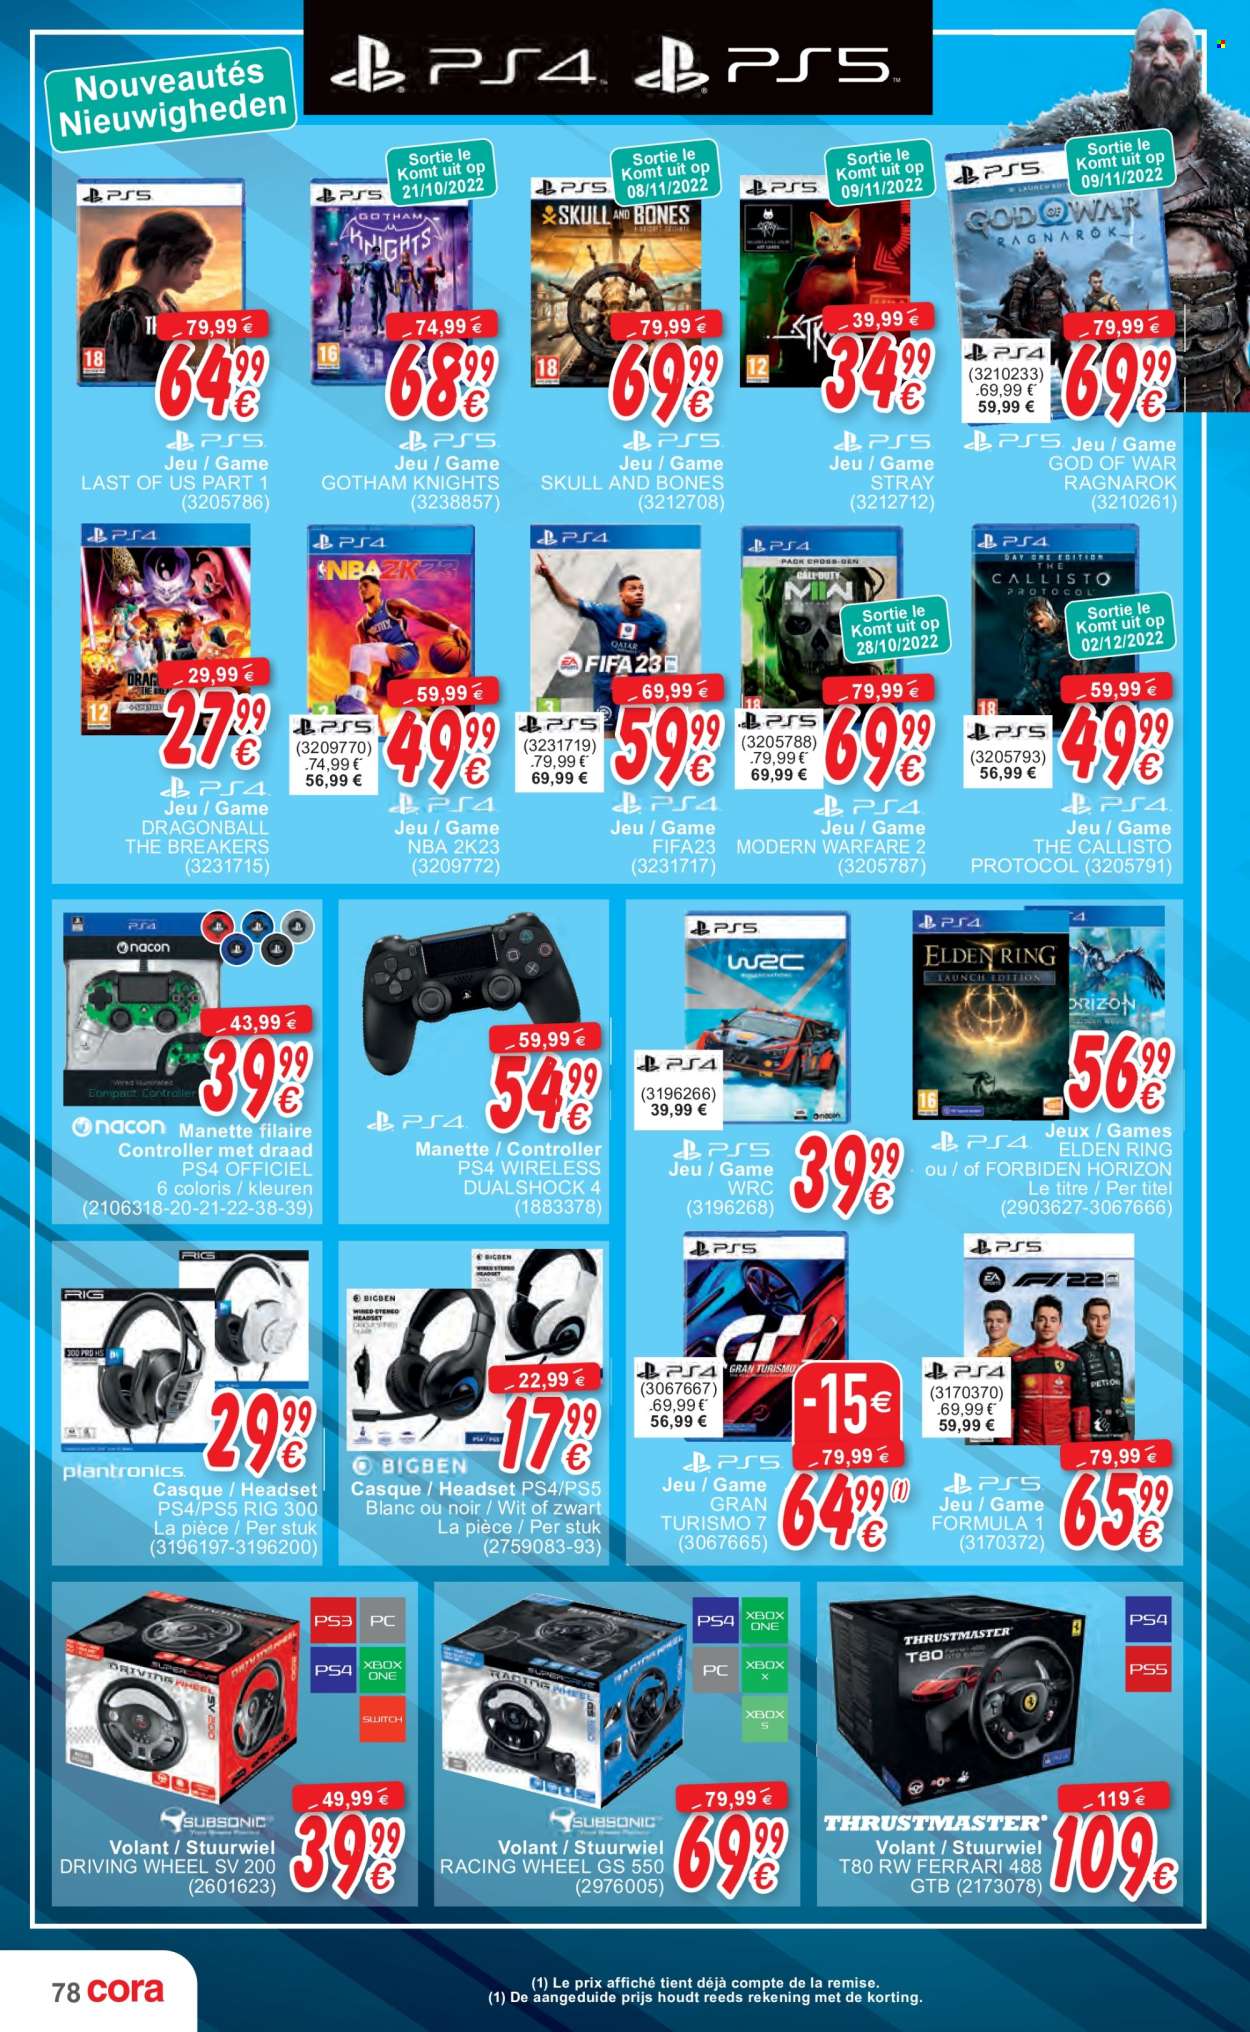 thumbnail - Cora-aanbieding - 18/10/2022 - 06/12/2022 -  producten in de aanbieding - PlayStation 4, switch, Xbox One, PlayStation 5, Xbox, controller, headset, ring, stuurwiel, computer. Pagina 78.